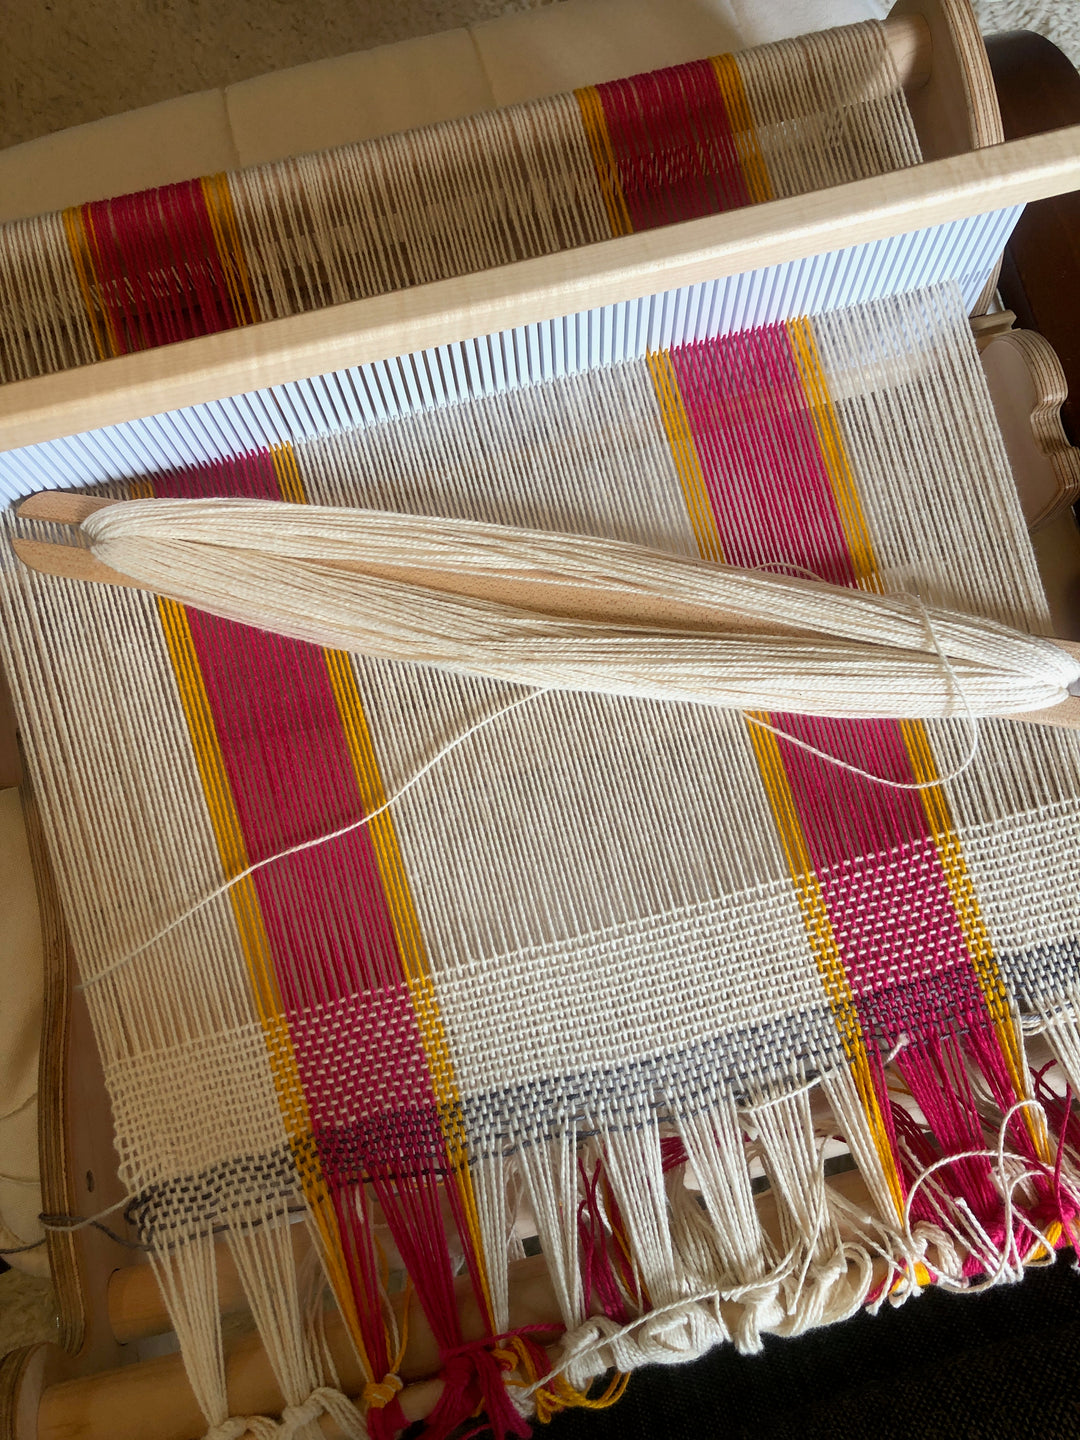 Join our weaving obsession, friends!